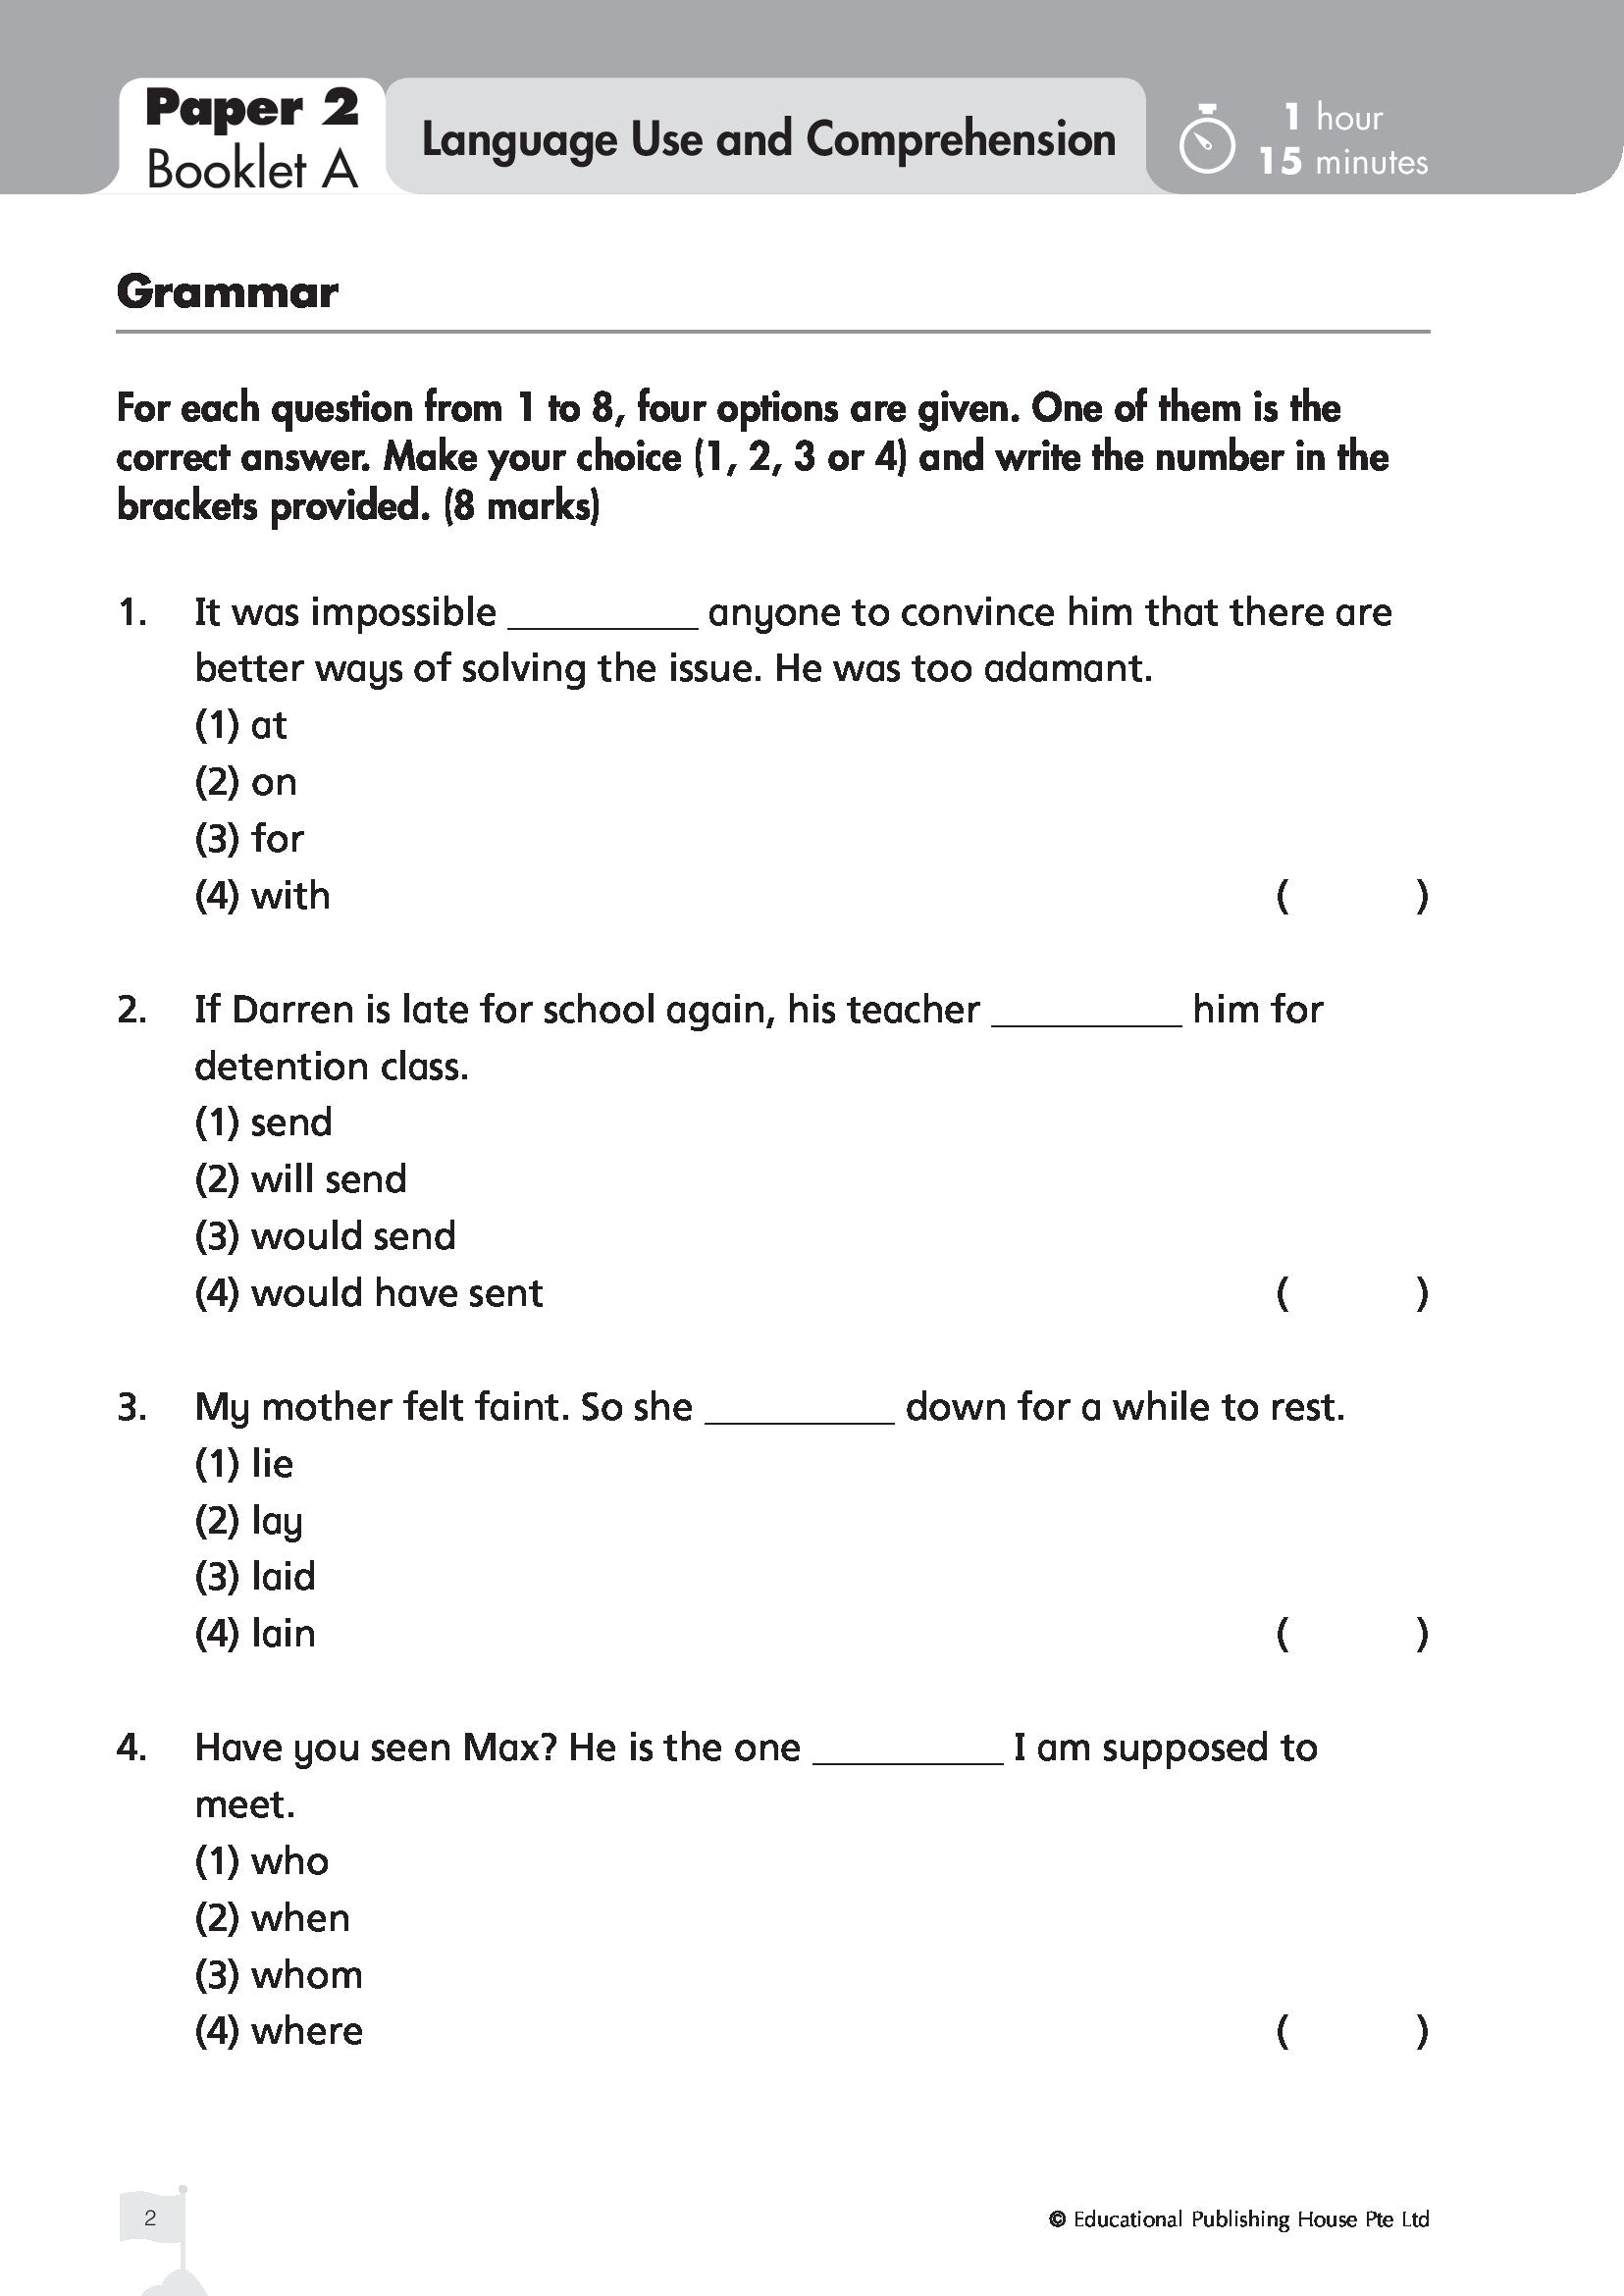 Primary 4 English Top The Class Term/Sem Papers QR - _MS, CHALLENGING, Cindy Lim, EDUCATIONAL PUBLISHING HOUSE, ENGLISH, PRIMARY 4